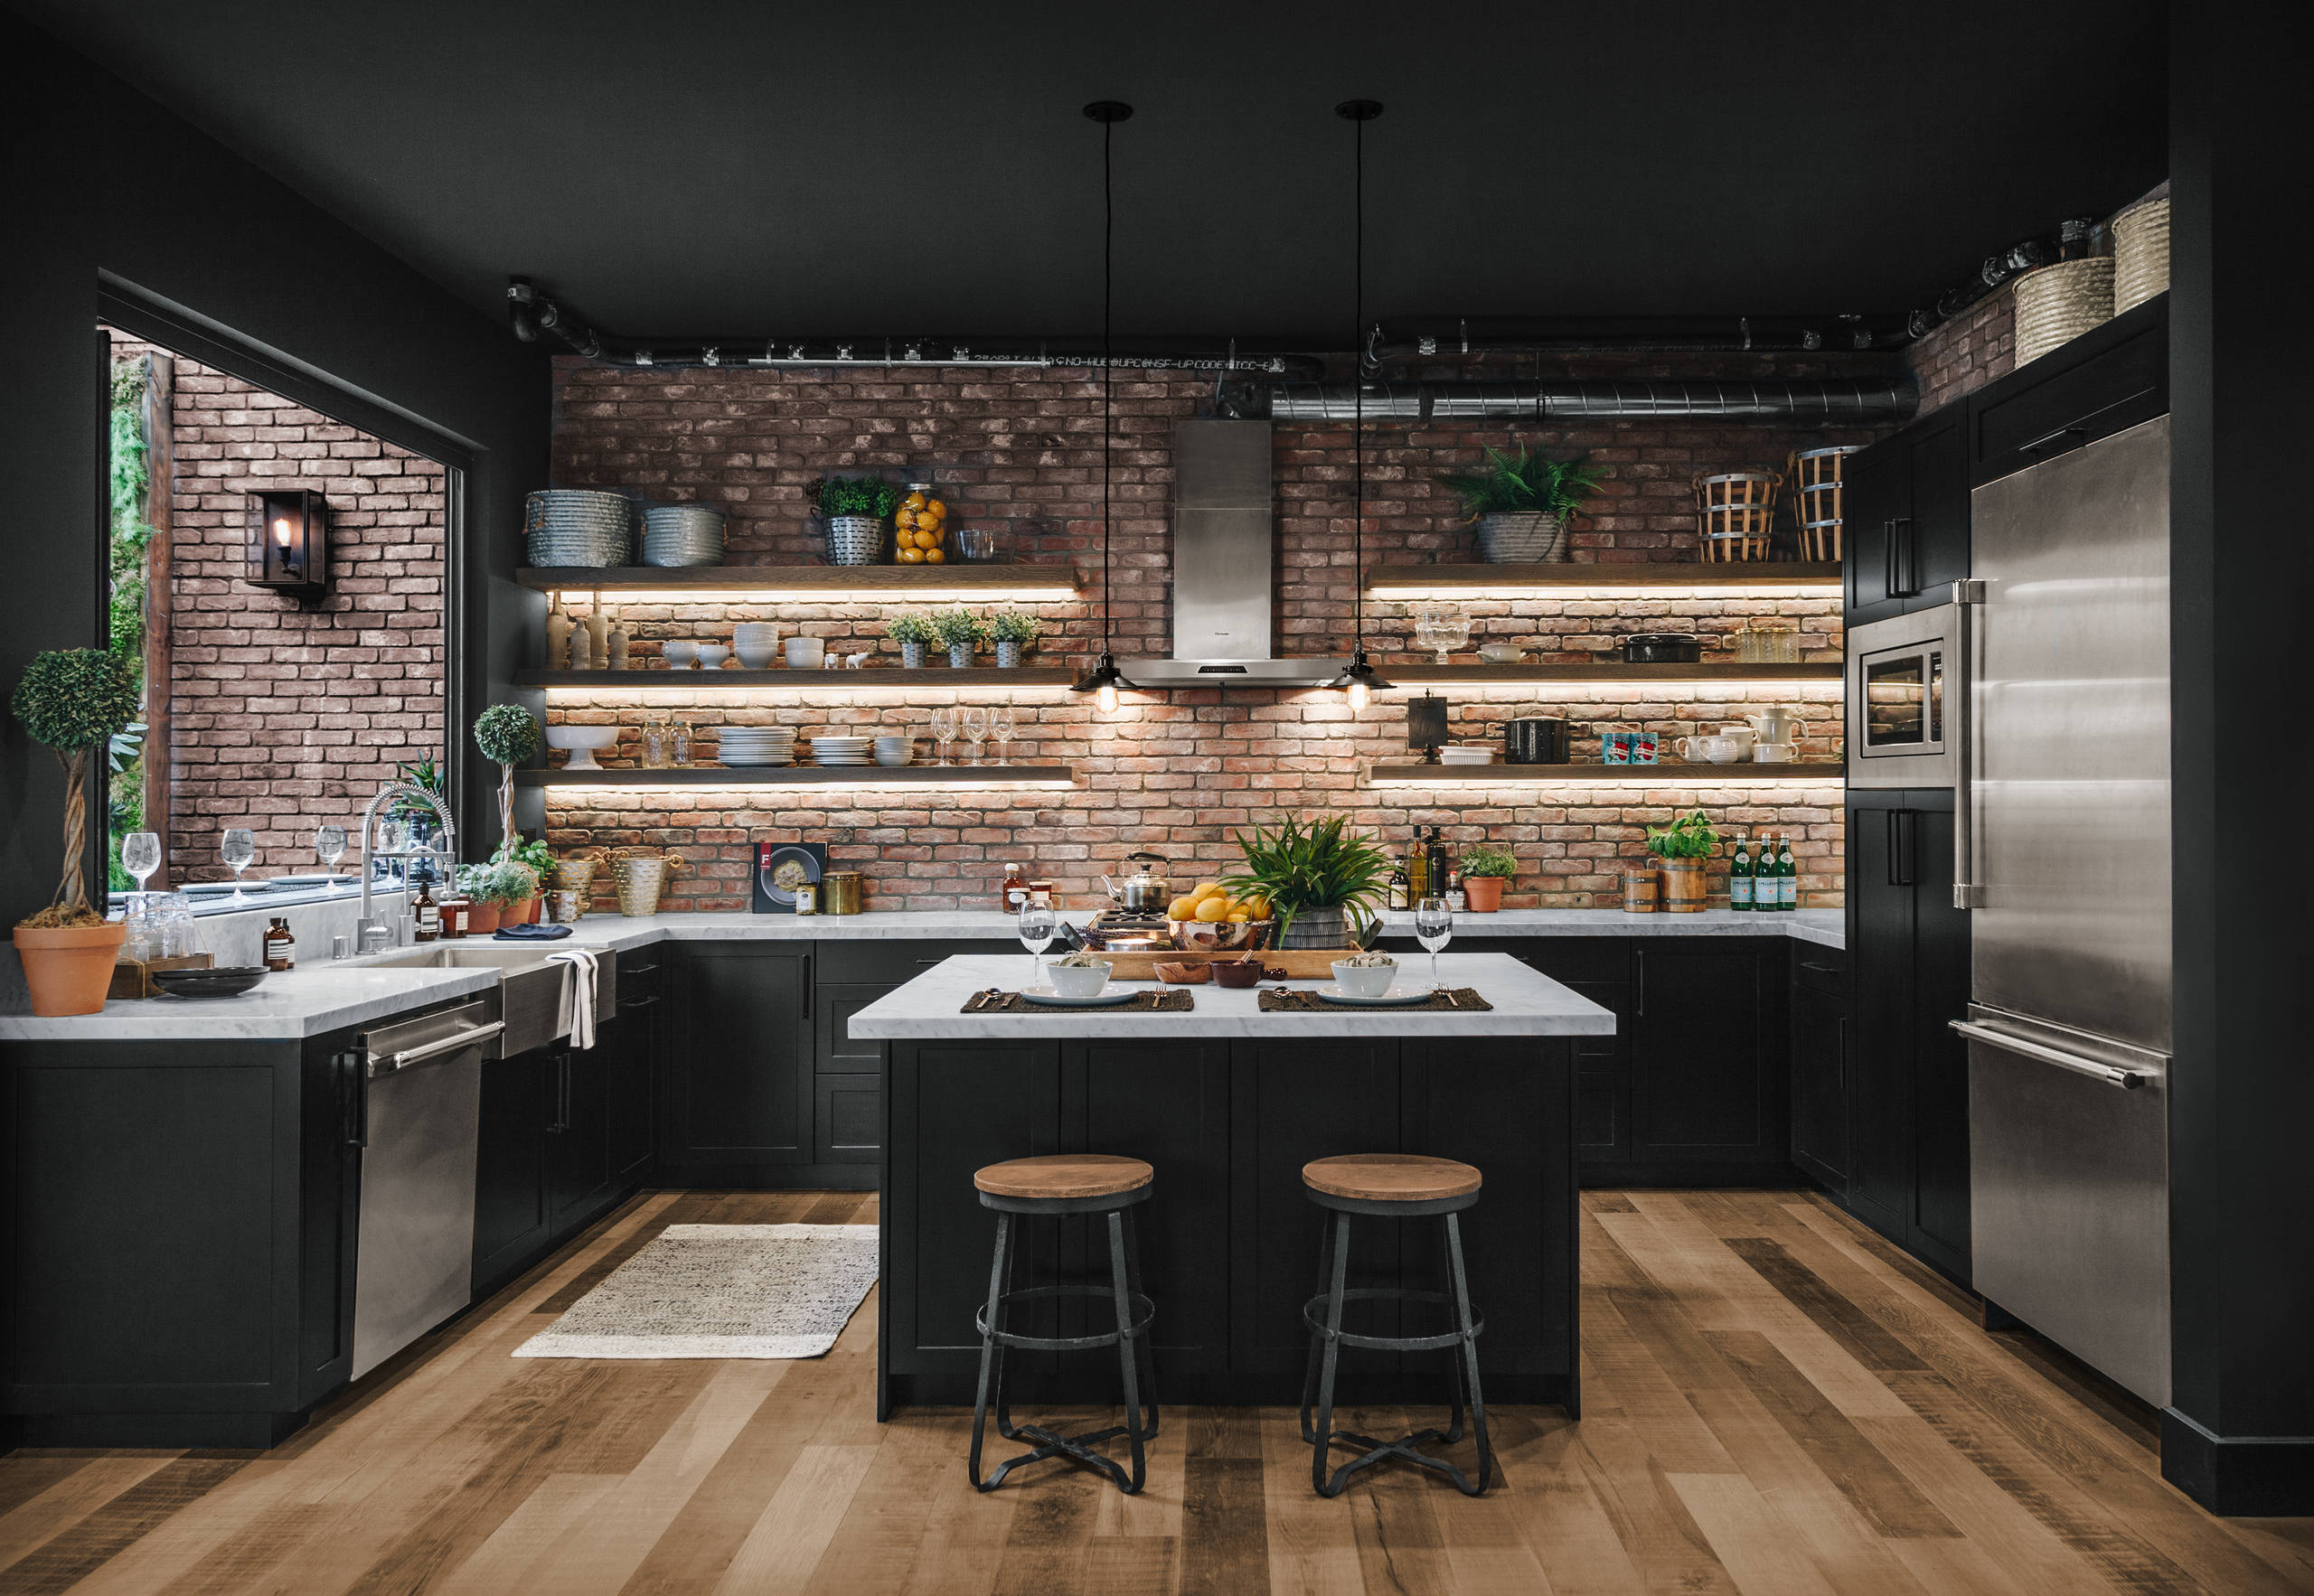 18 Industrial Kitchen Ideas You'll Love   October, 18   Houzz